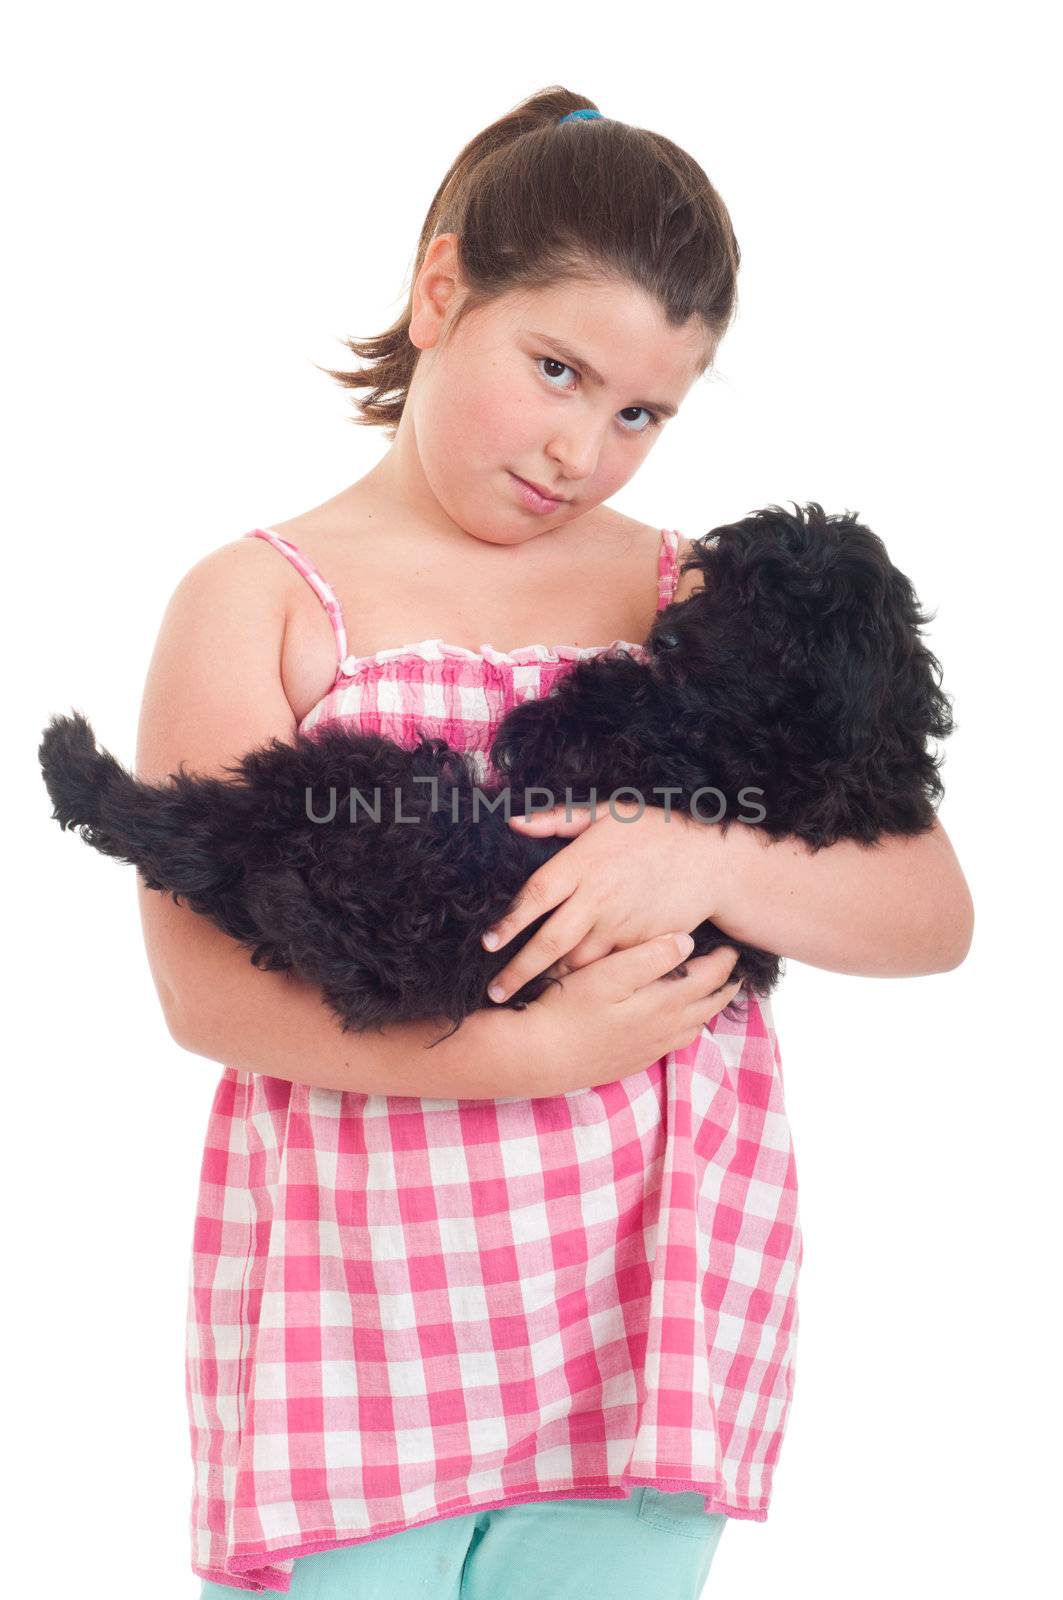 adorable little girl holding her dog (isolated on white background)